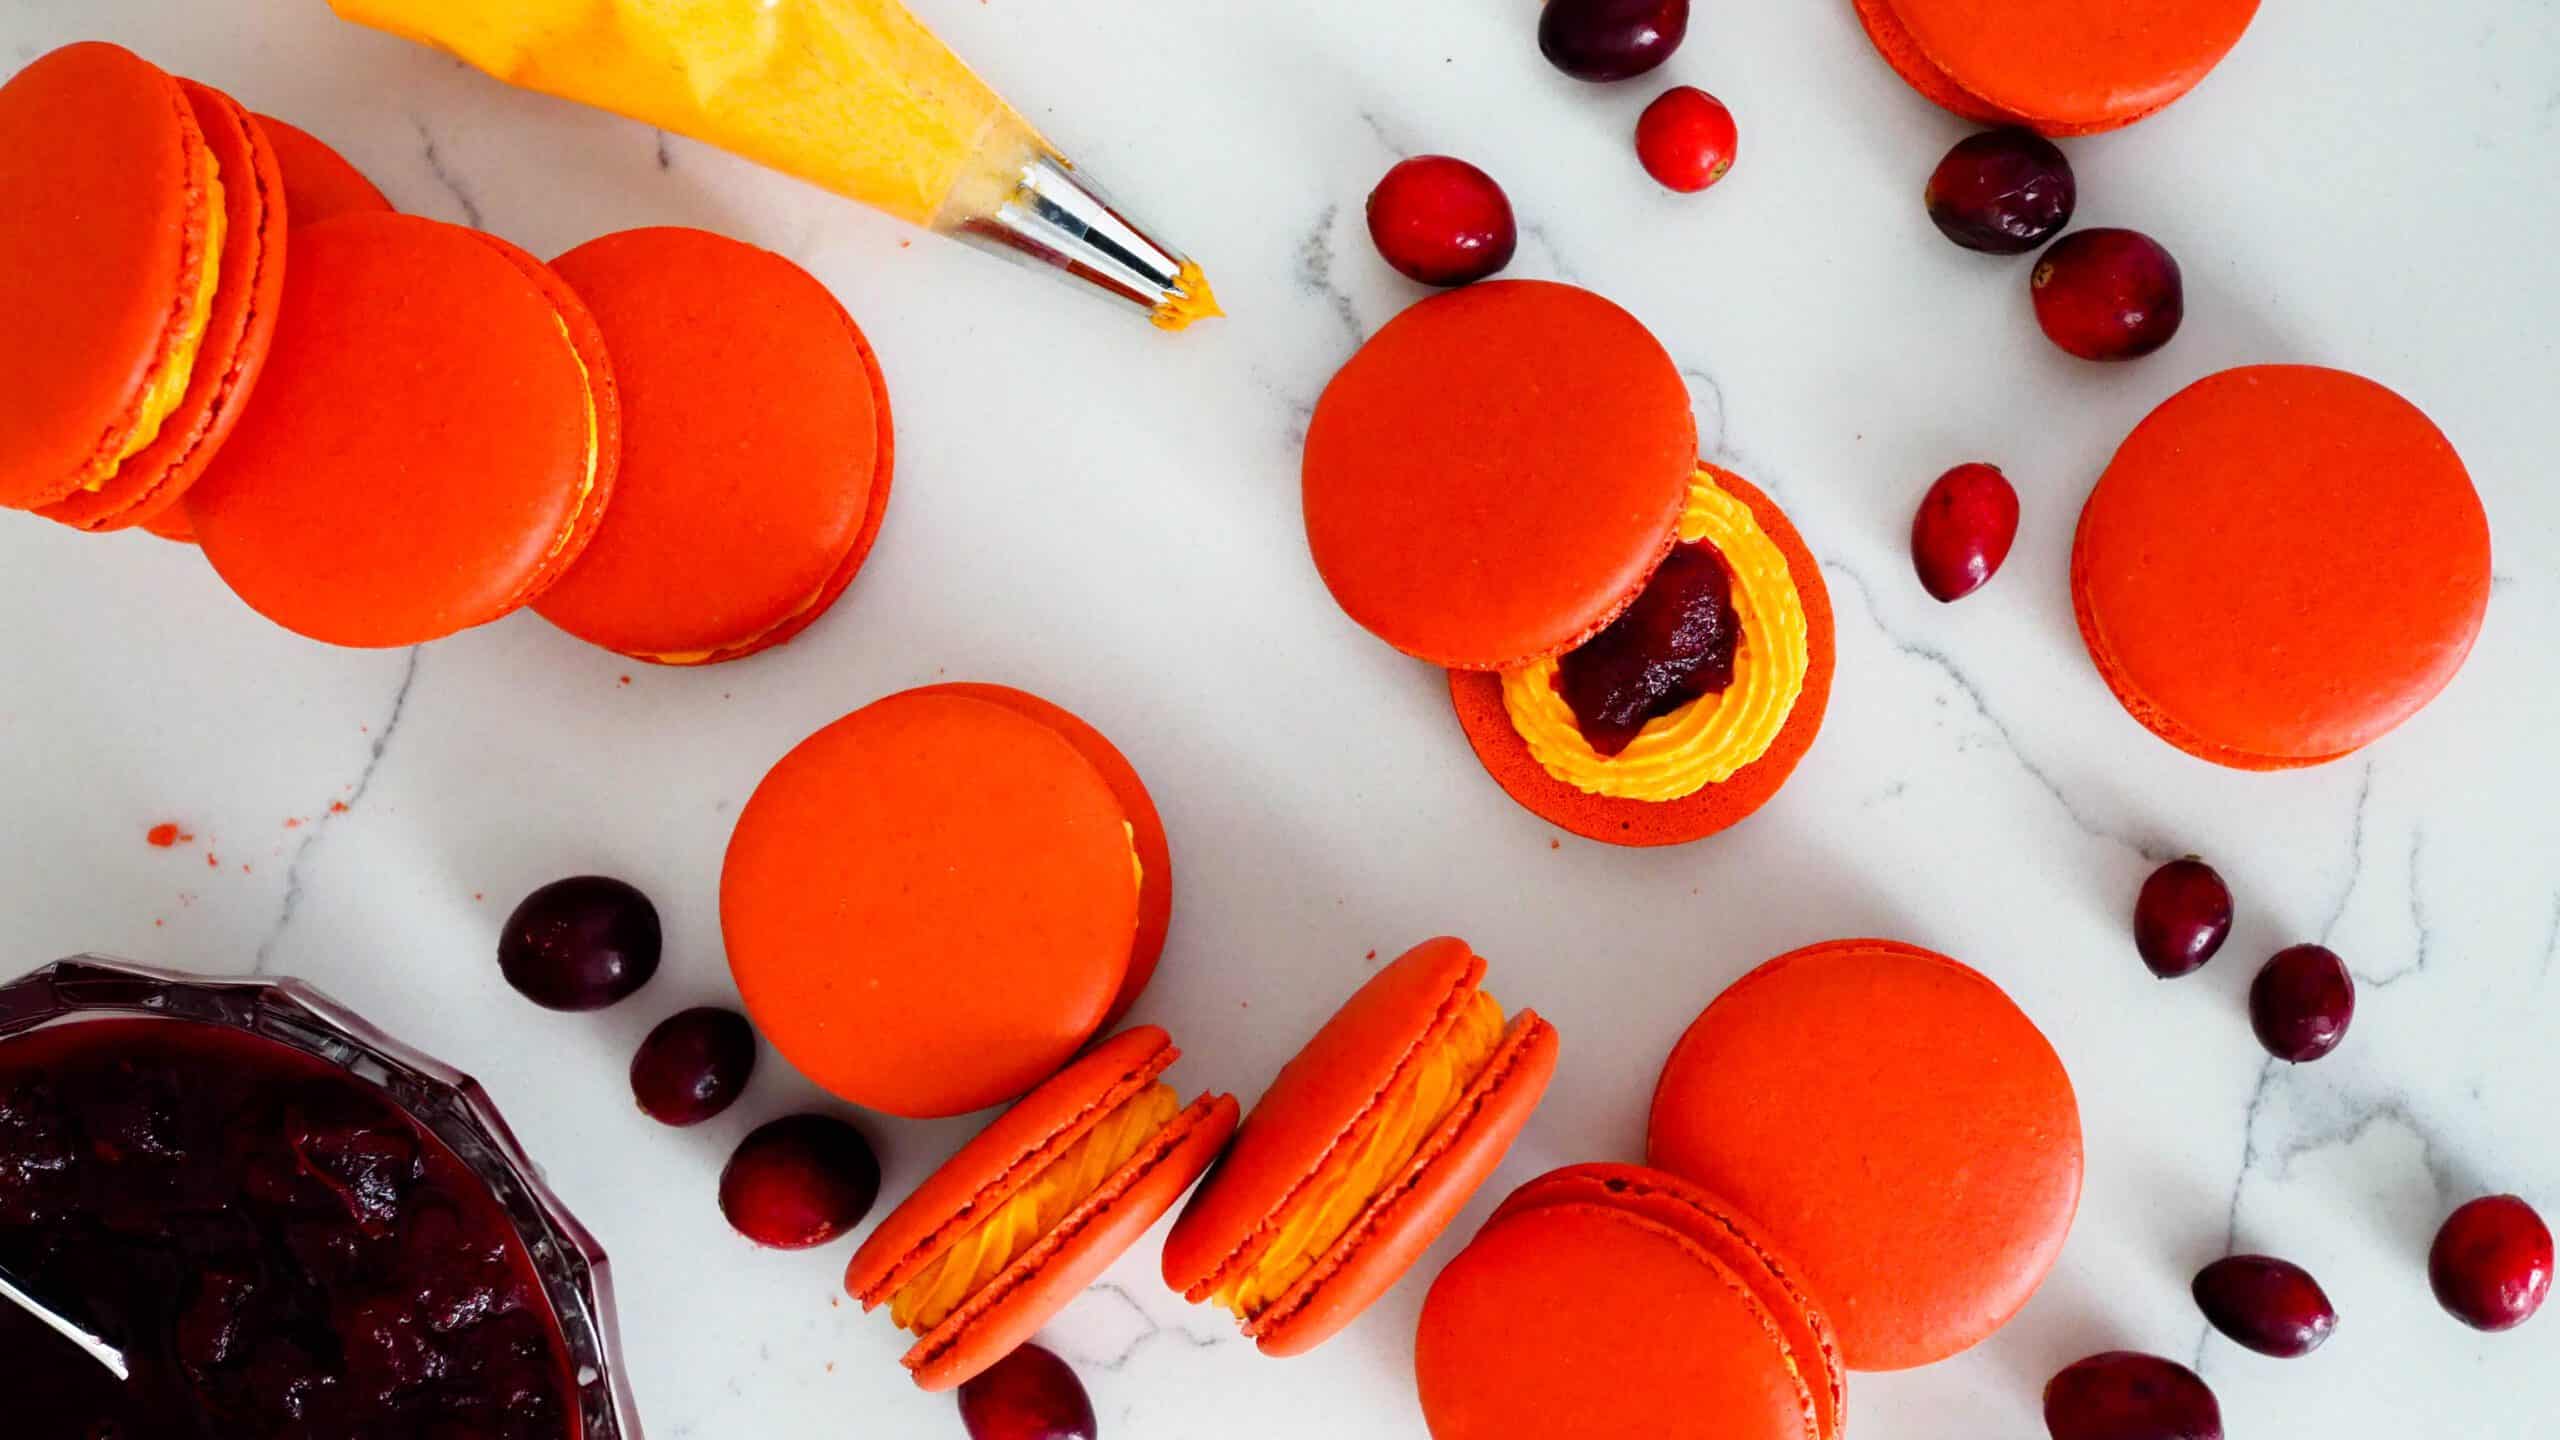 Cranberry orange macarons are arranged artfully on a counter with cranberries, a piping bag, and a bowl of cranberry sauce.